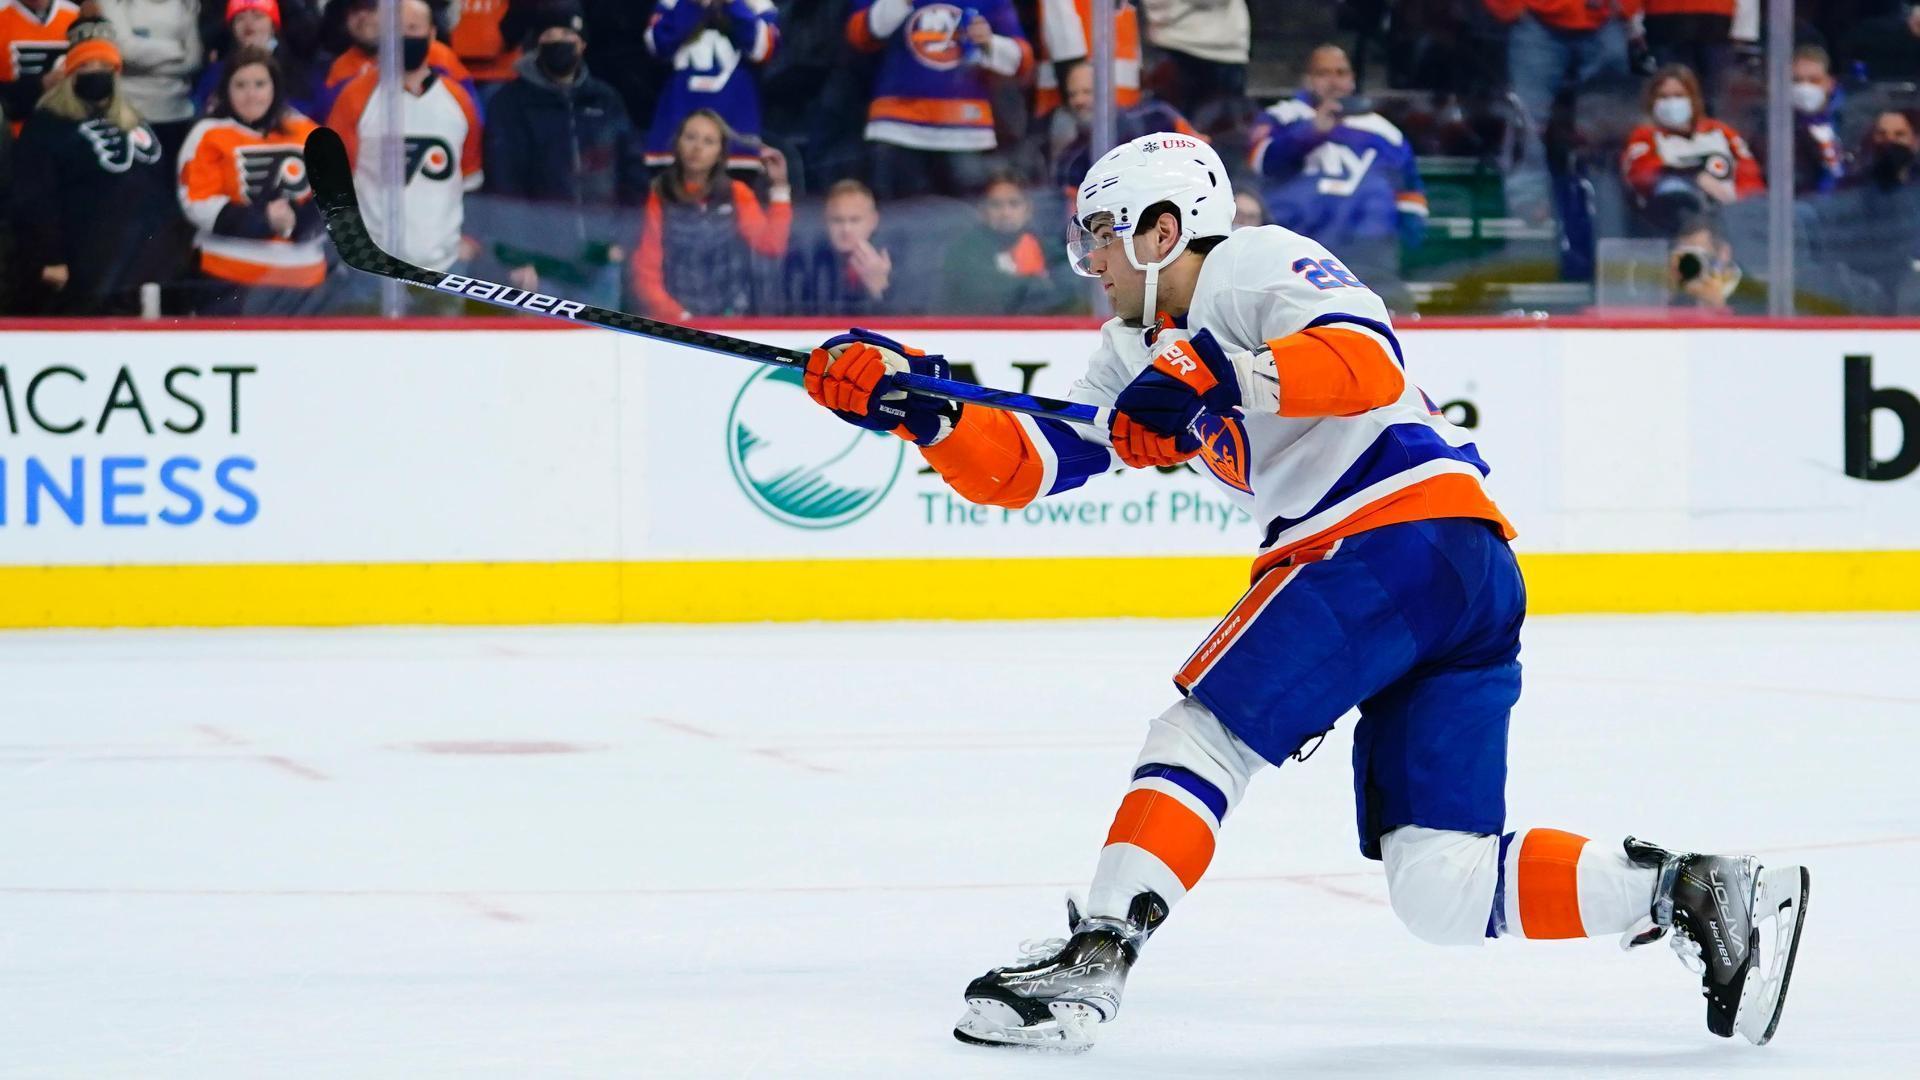 The Islanders win in ninth round of shootout